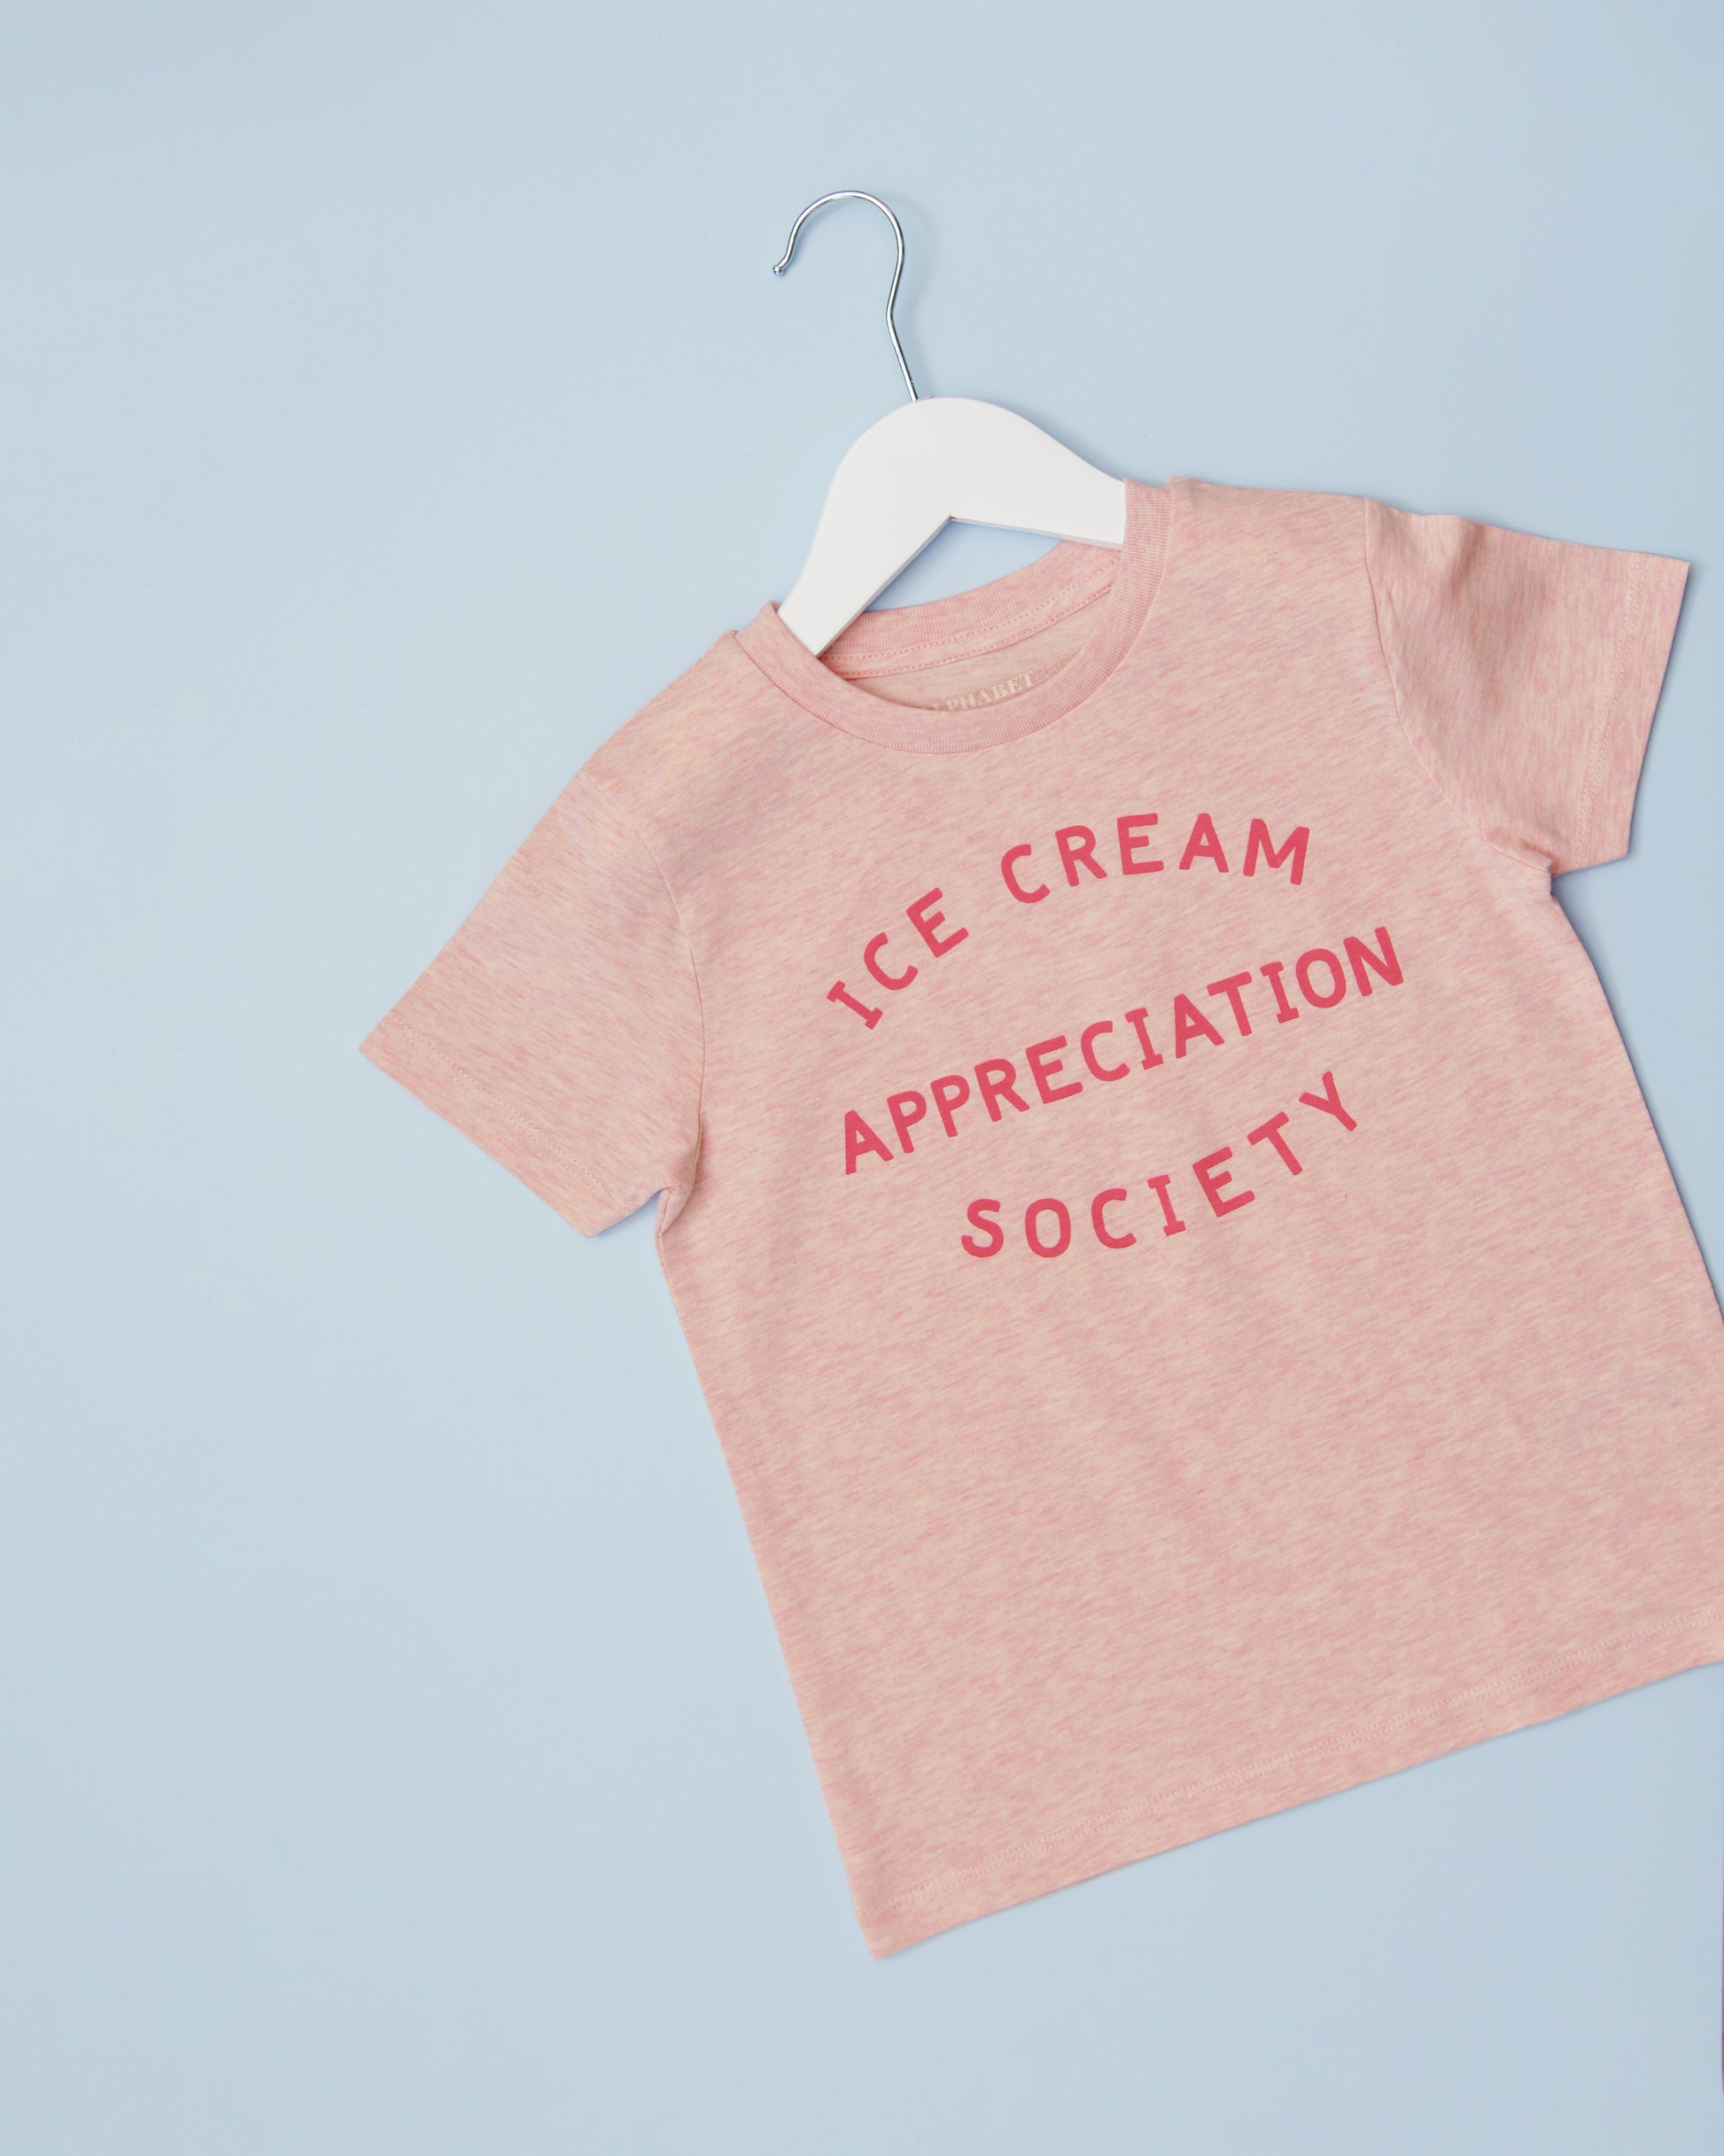 Ice Cream Appreciation Society Tee at Whippersnappers online